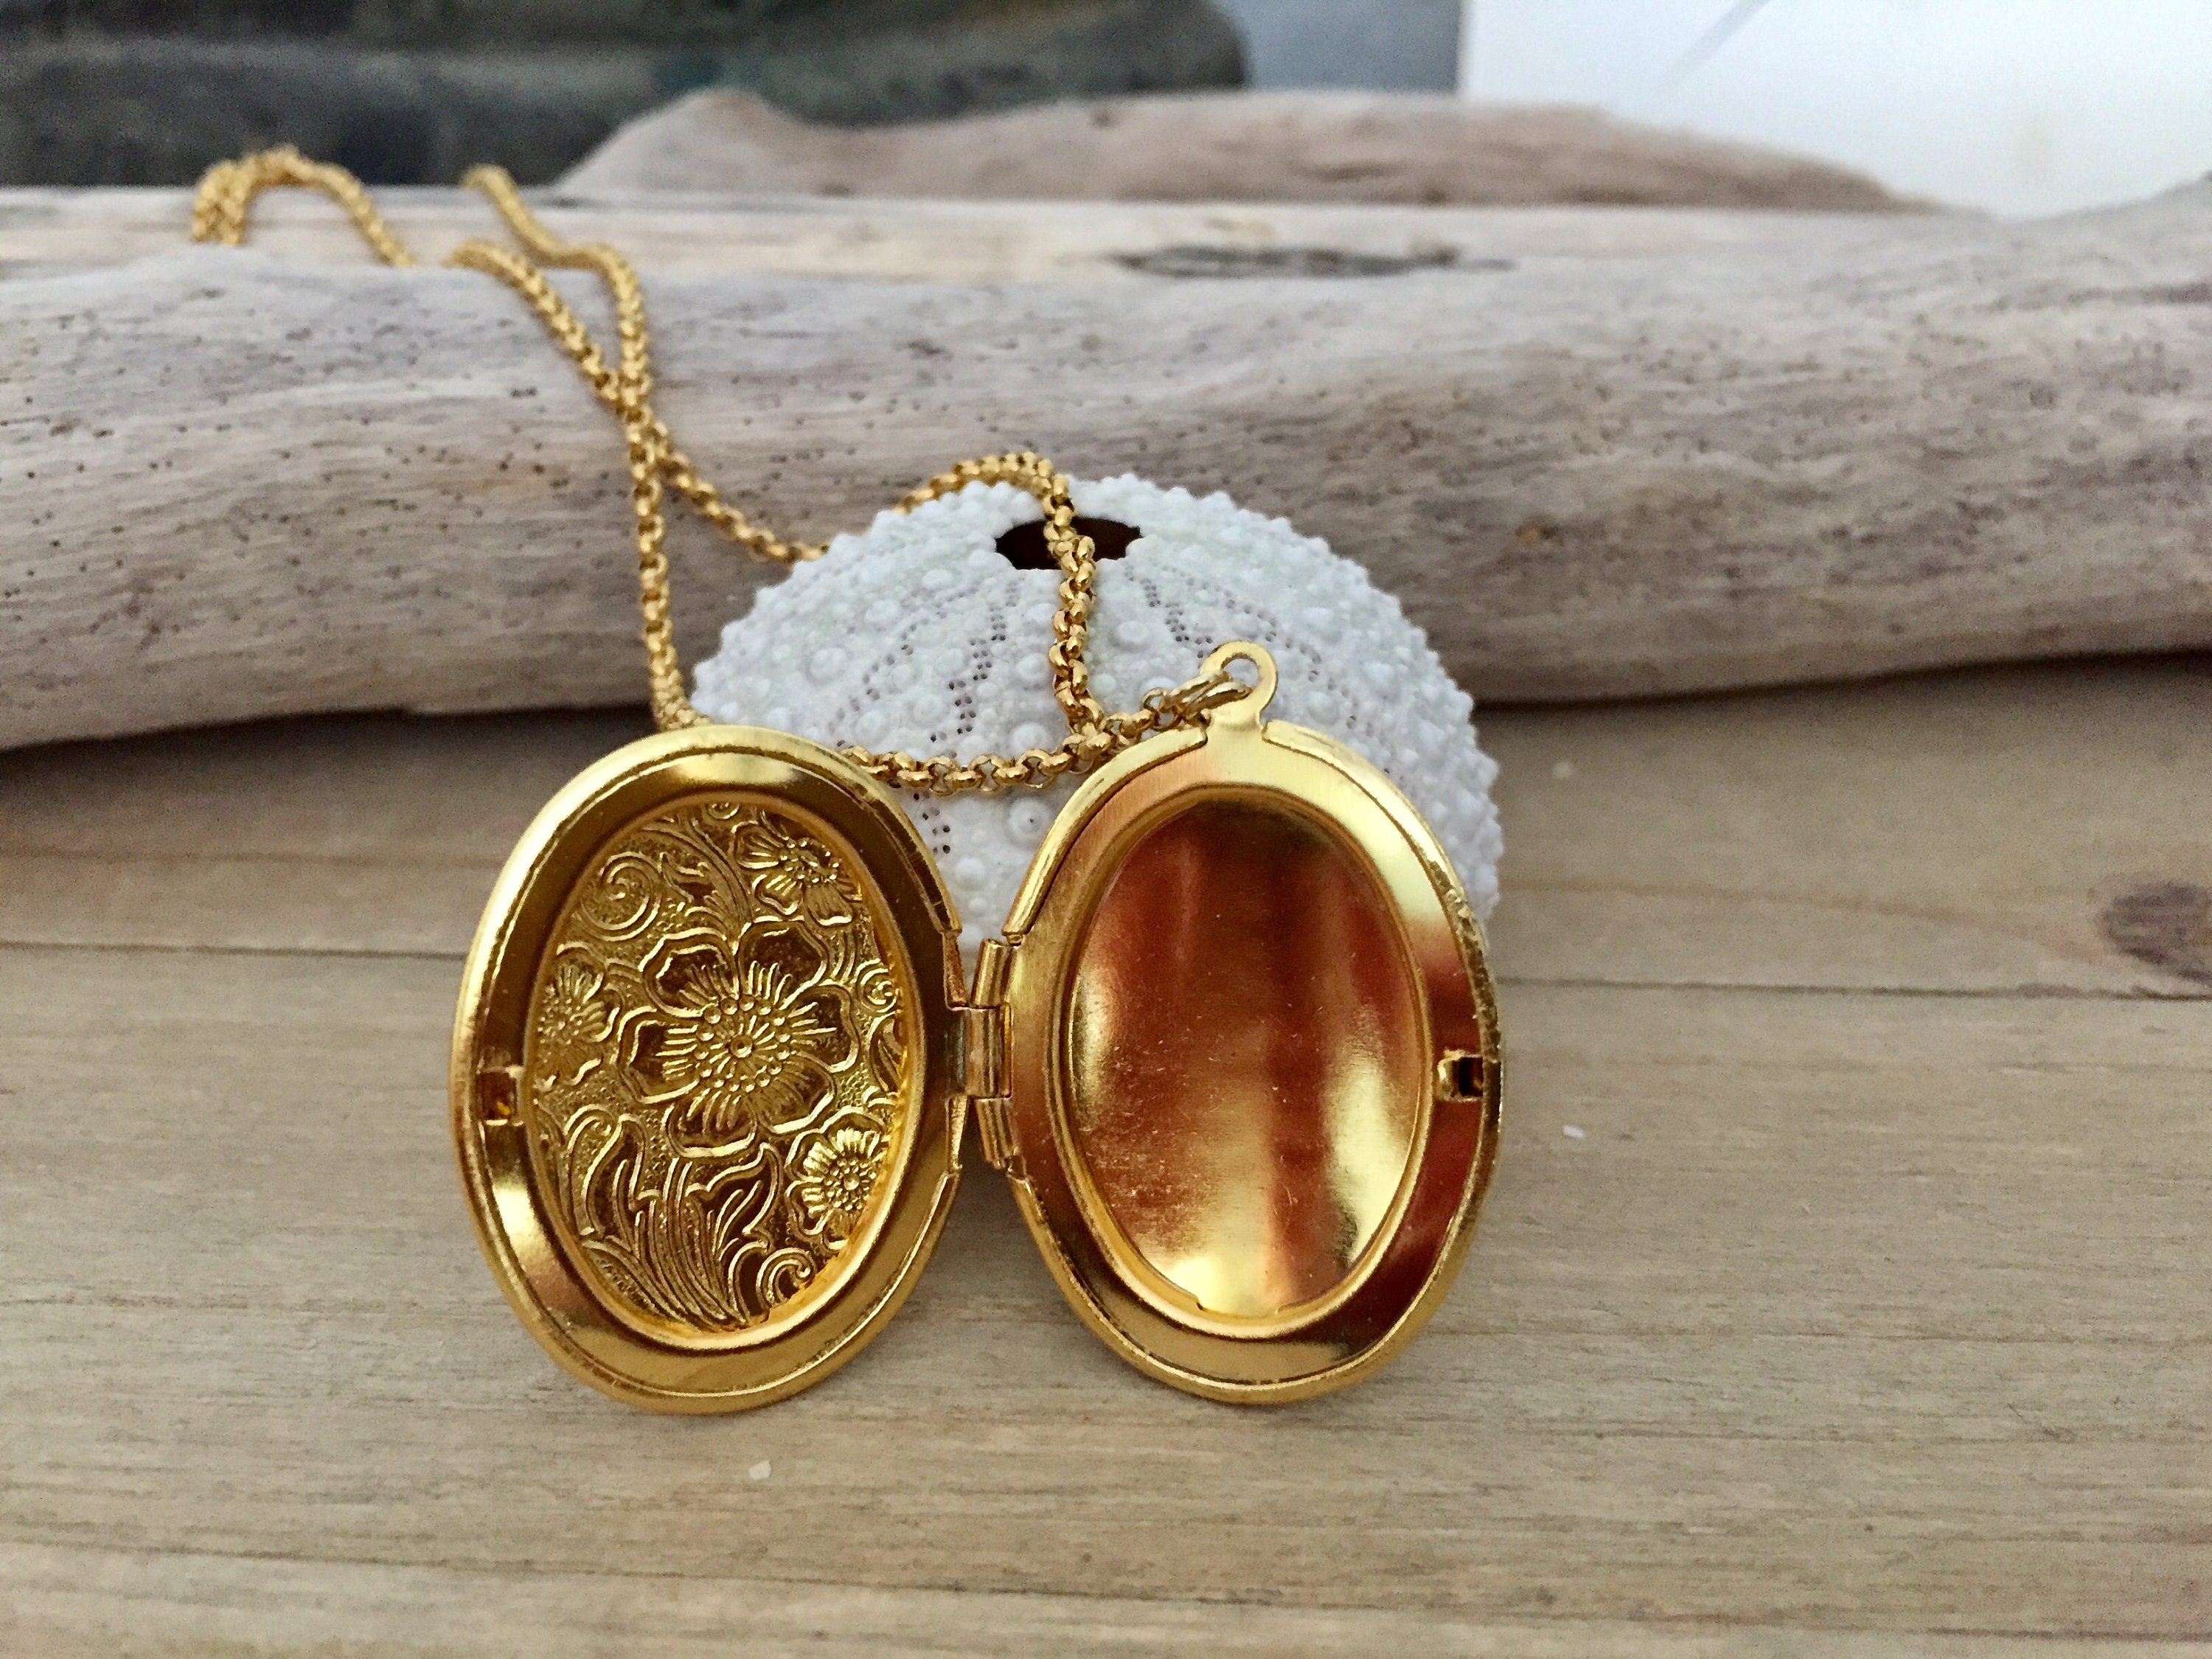 Antique hand engraved 14k yellow gold locket necklace – Victorious